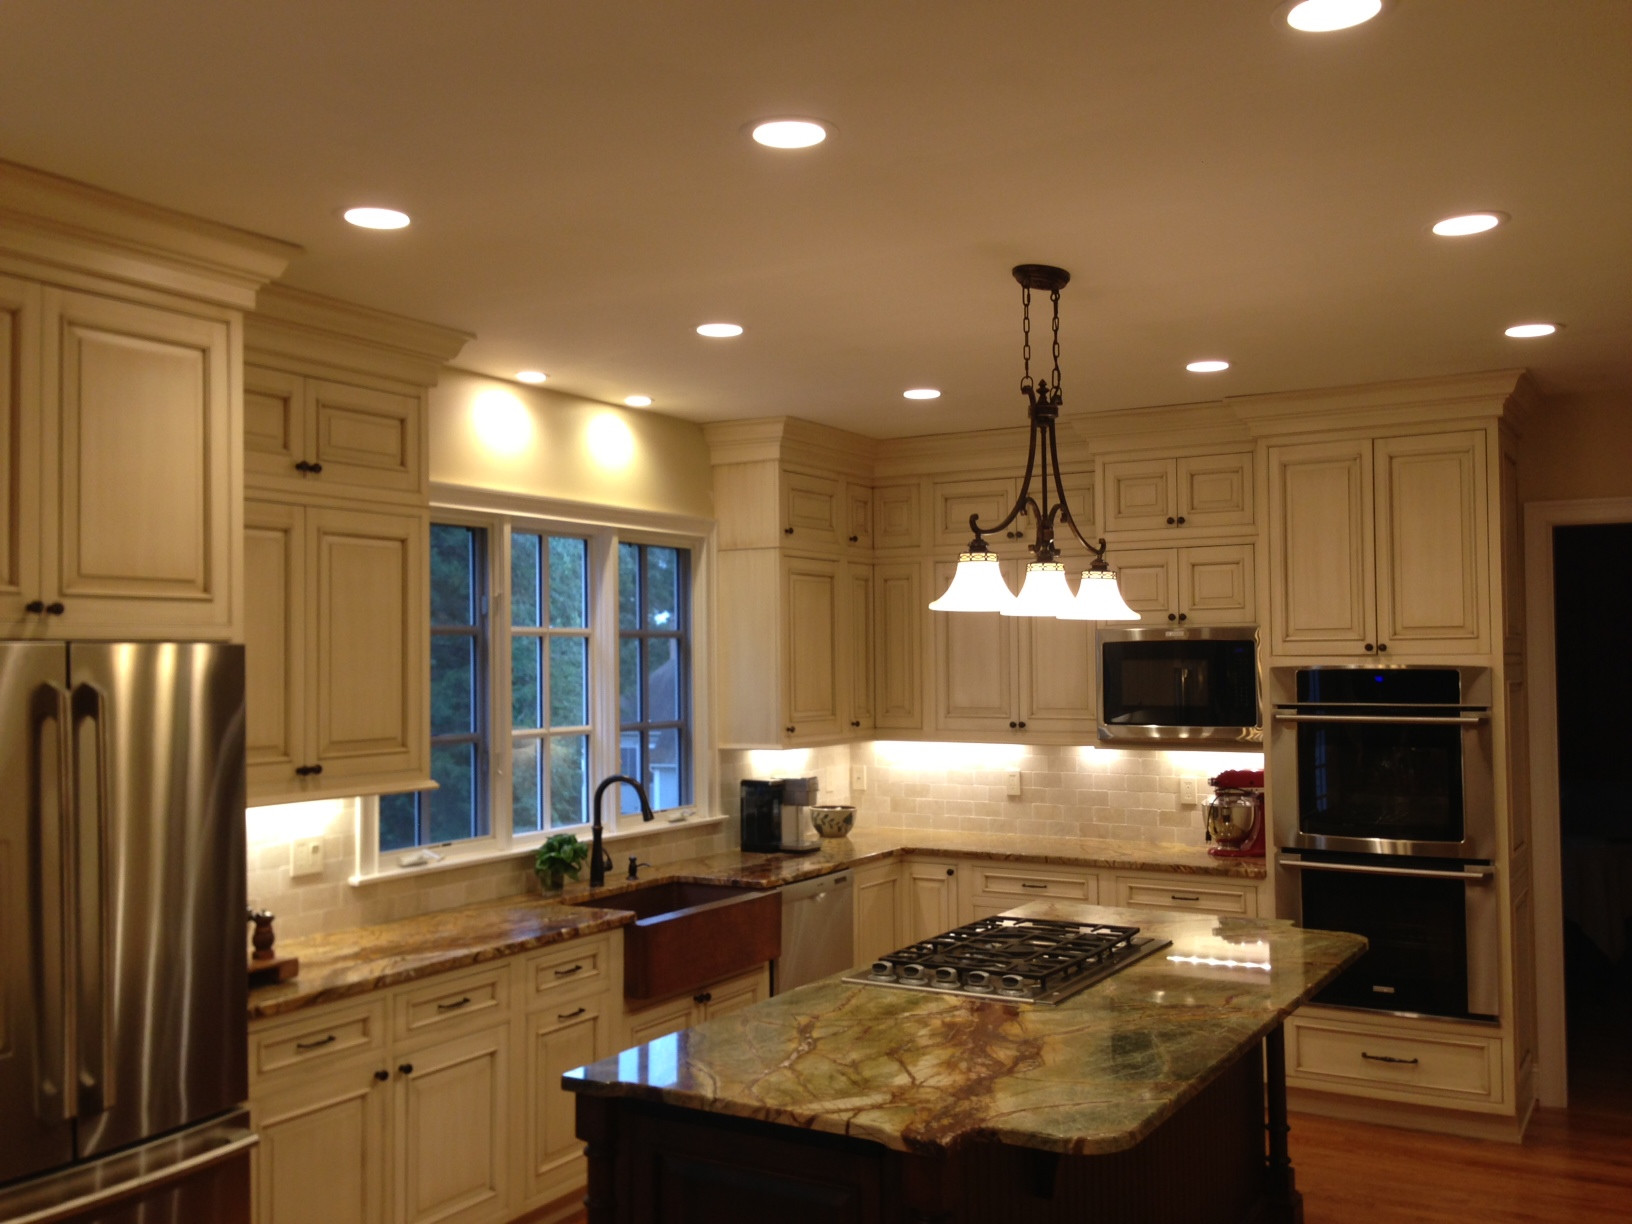 Recessed Lighting Kitchens
 Pot Lighting In Kitchen BClight